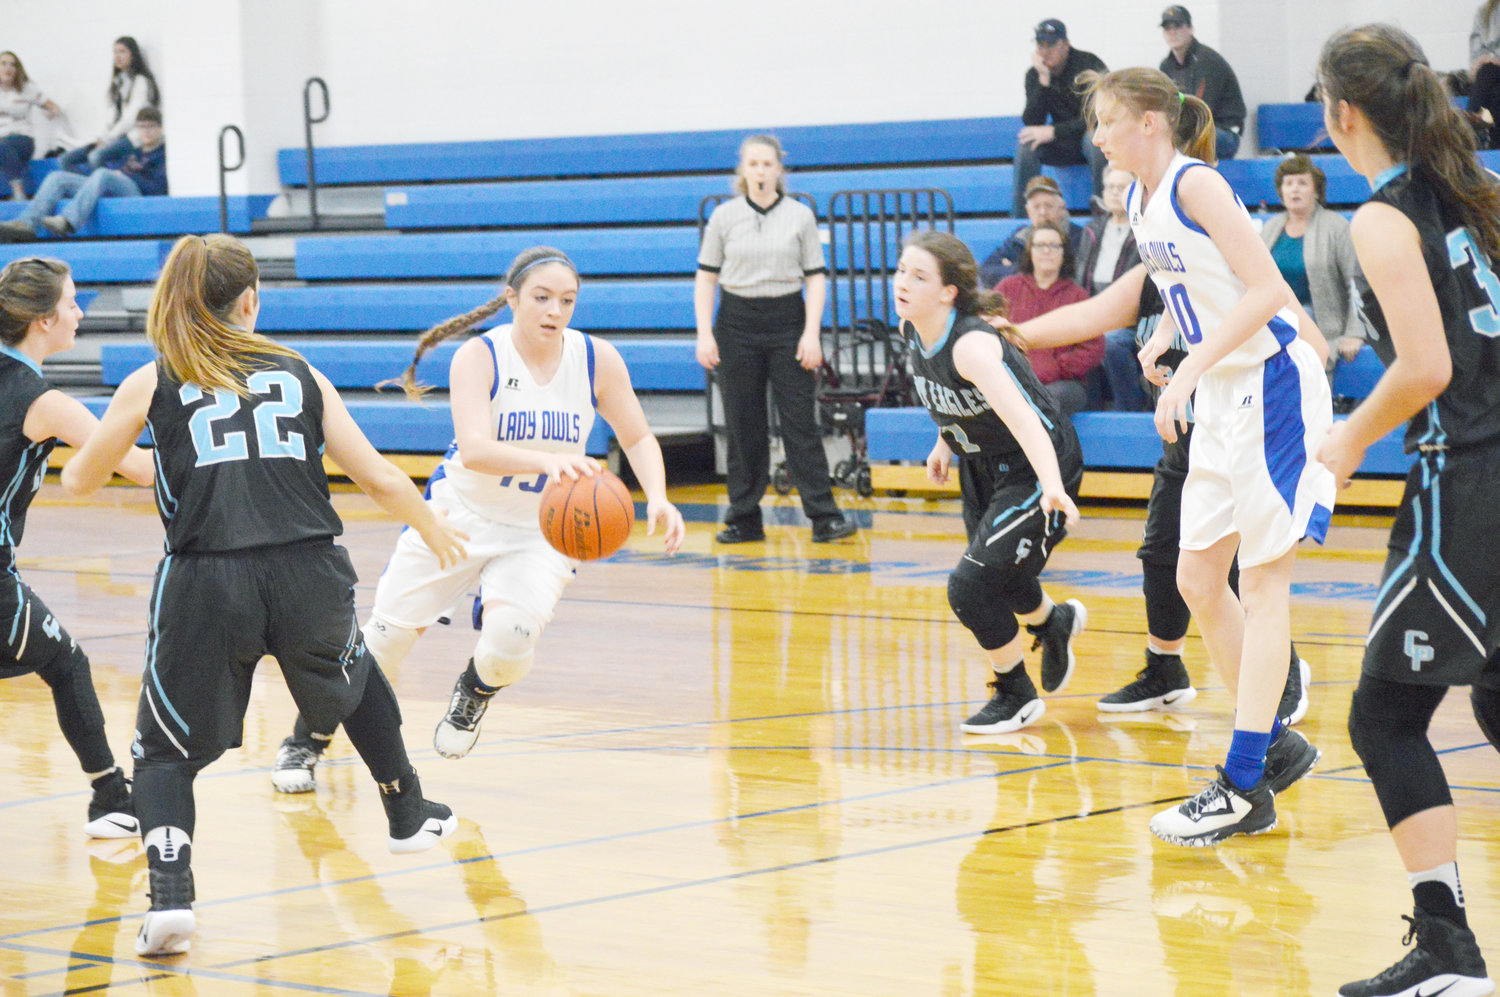 Yantis Lady Owls Montana Wetzel (15) drives to the bucket in their win over Como-Pickton. Also in the picture is teammate Maggie Hooker (10). (Photo by Larry tucker)